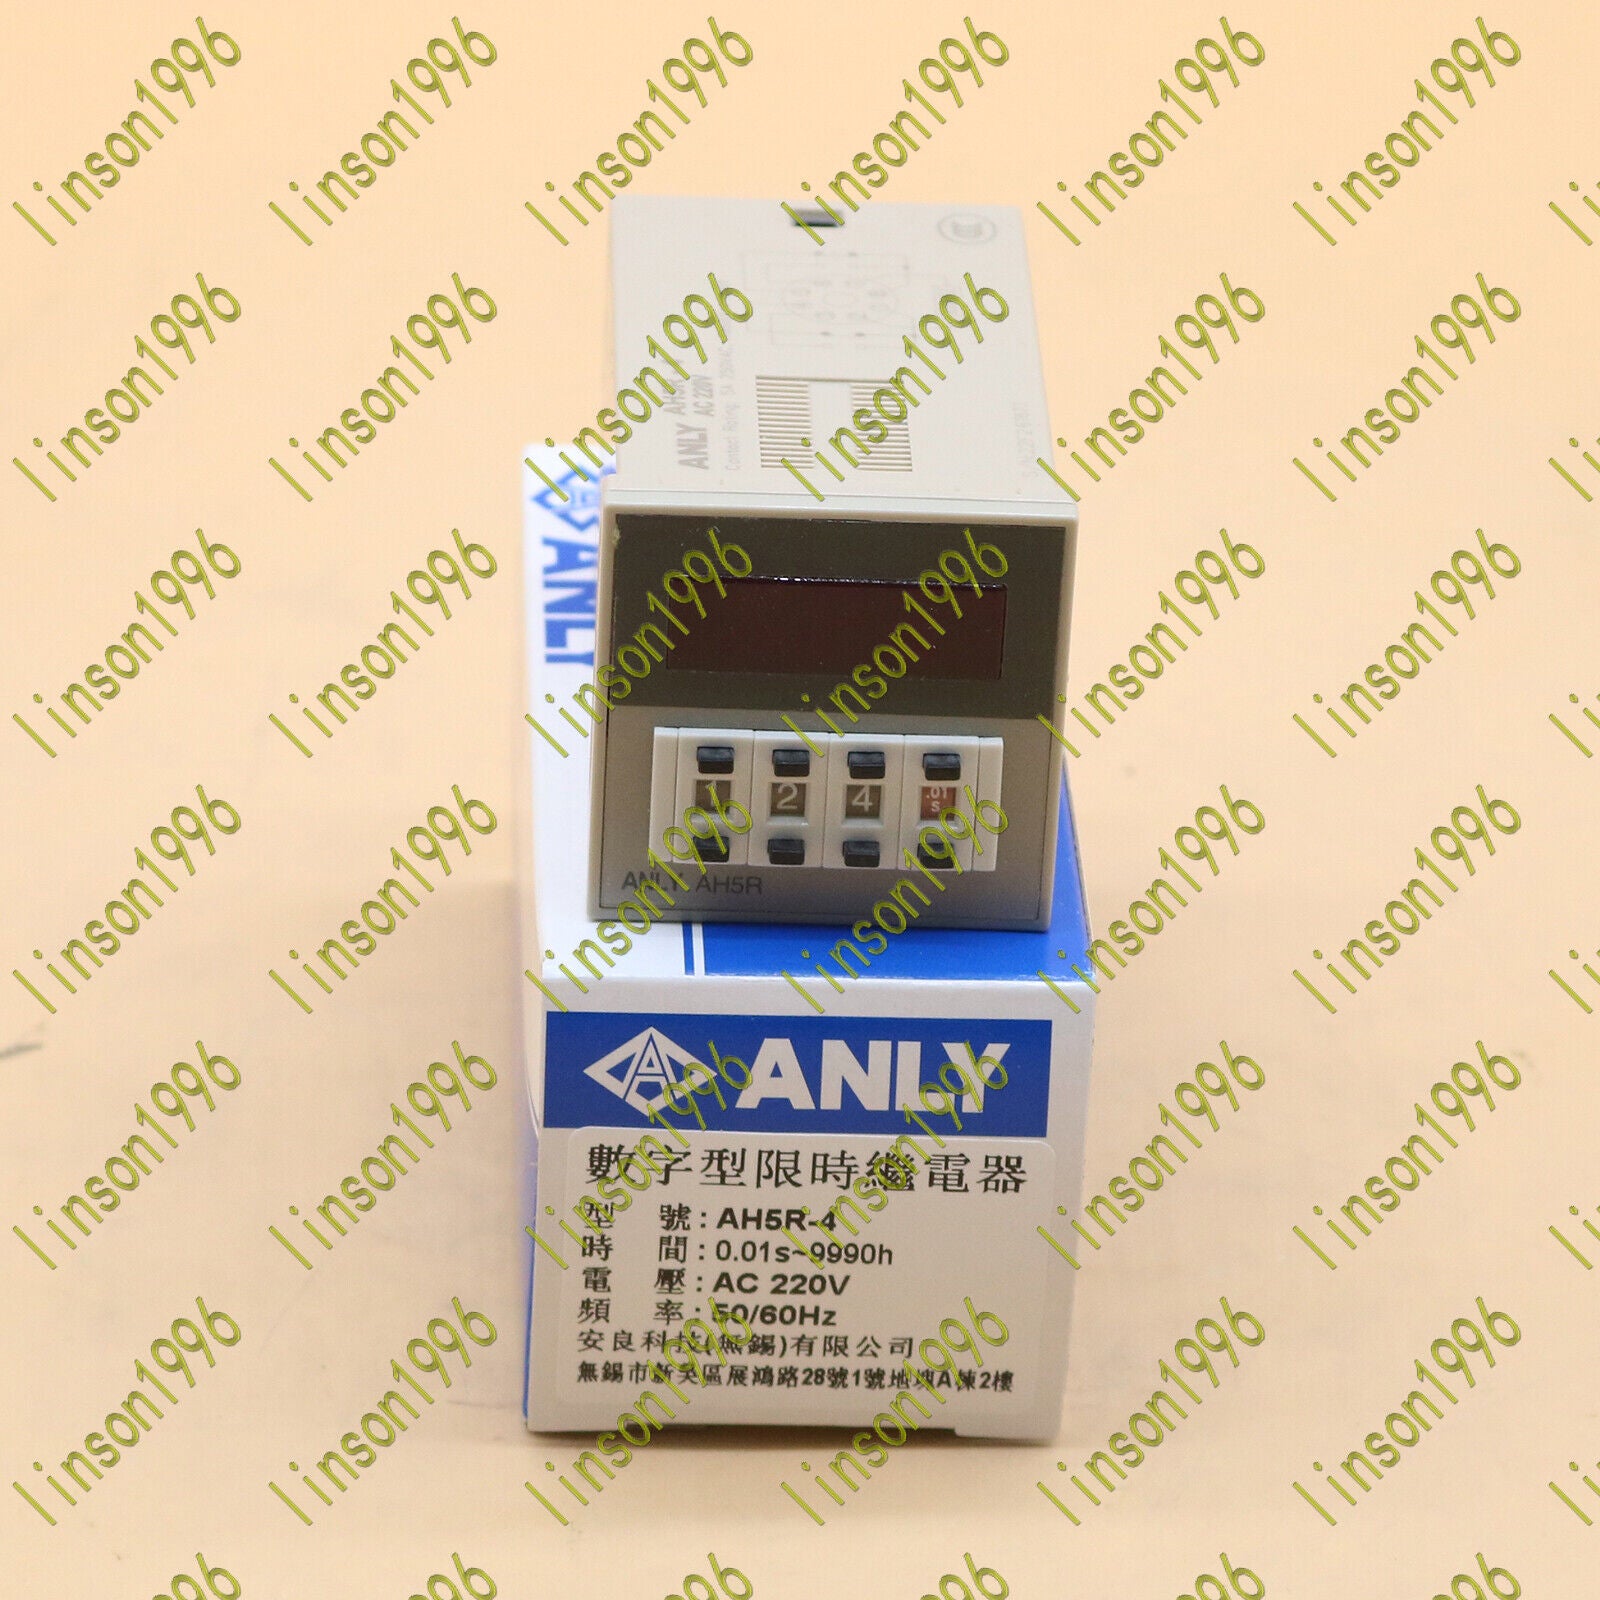 new 1PC  ANLY AH5R-4 AH5R-4 220V time relay Fast